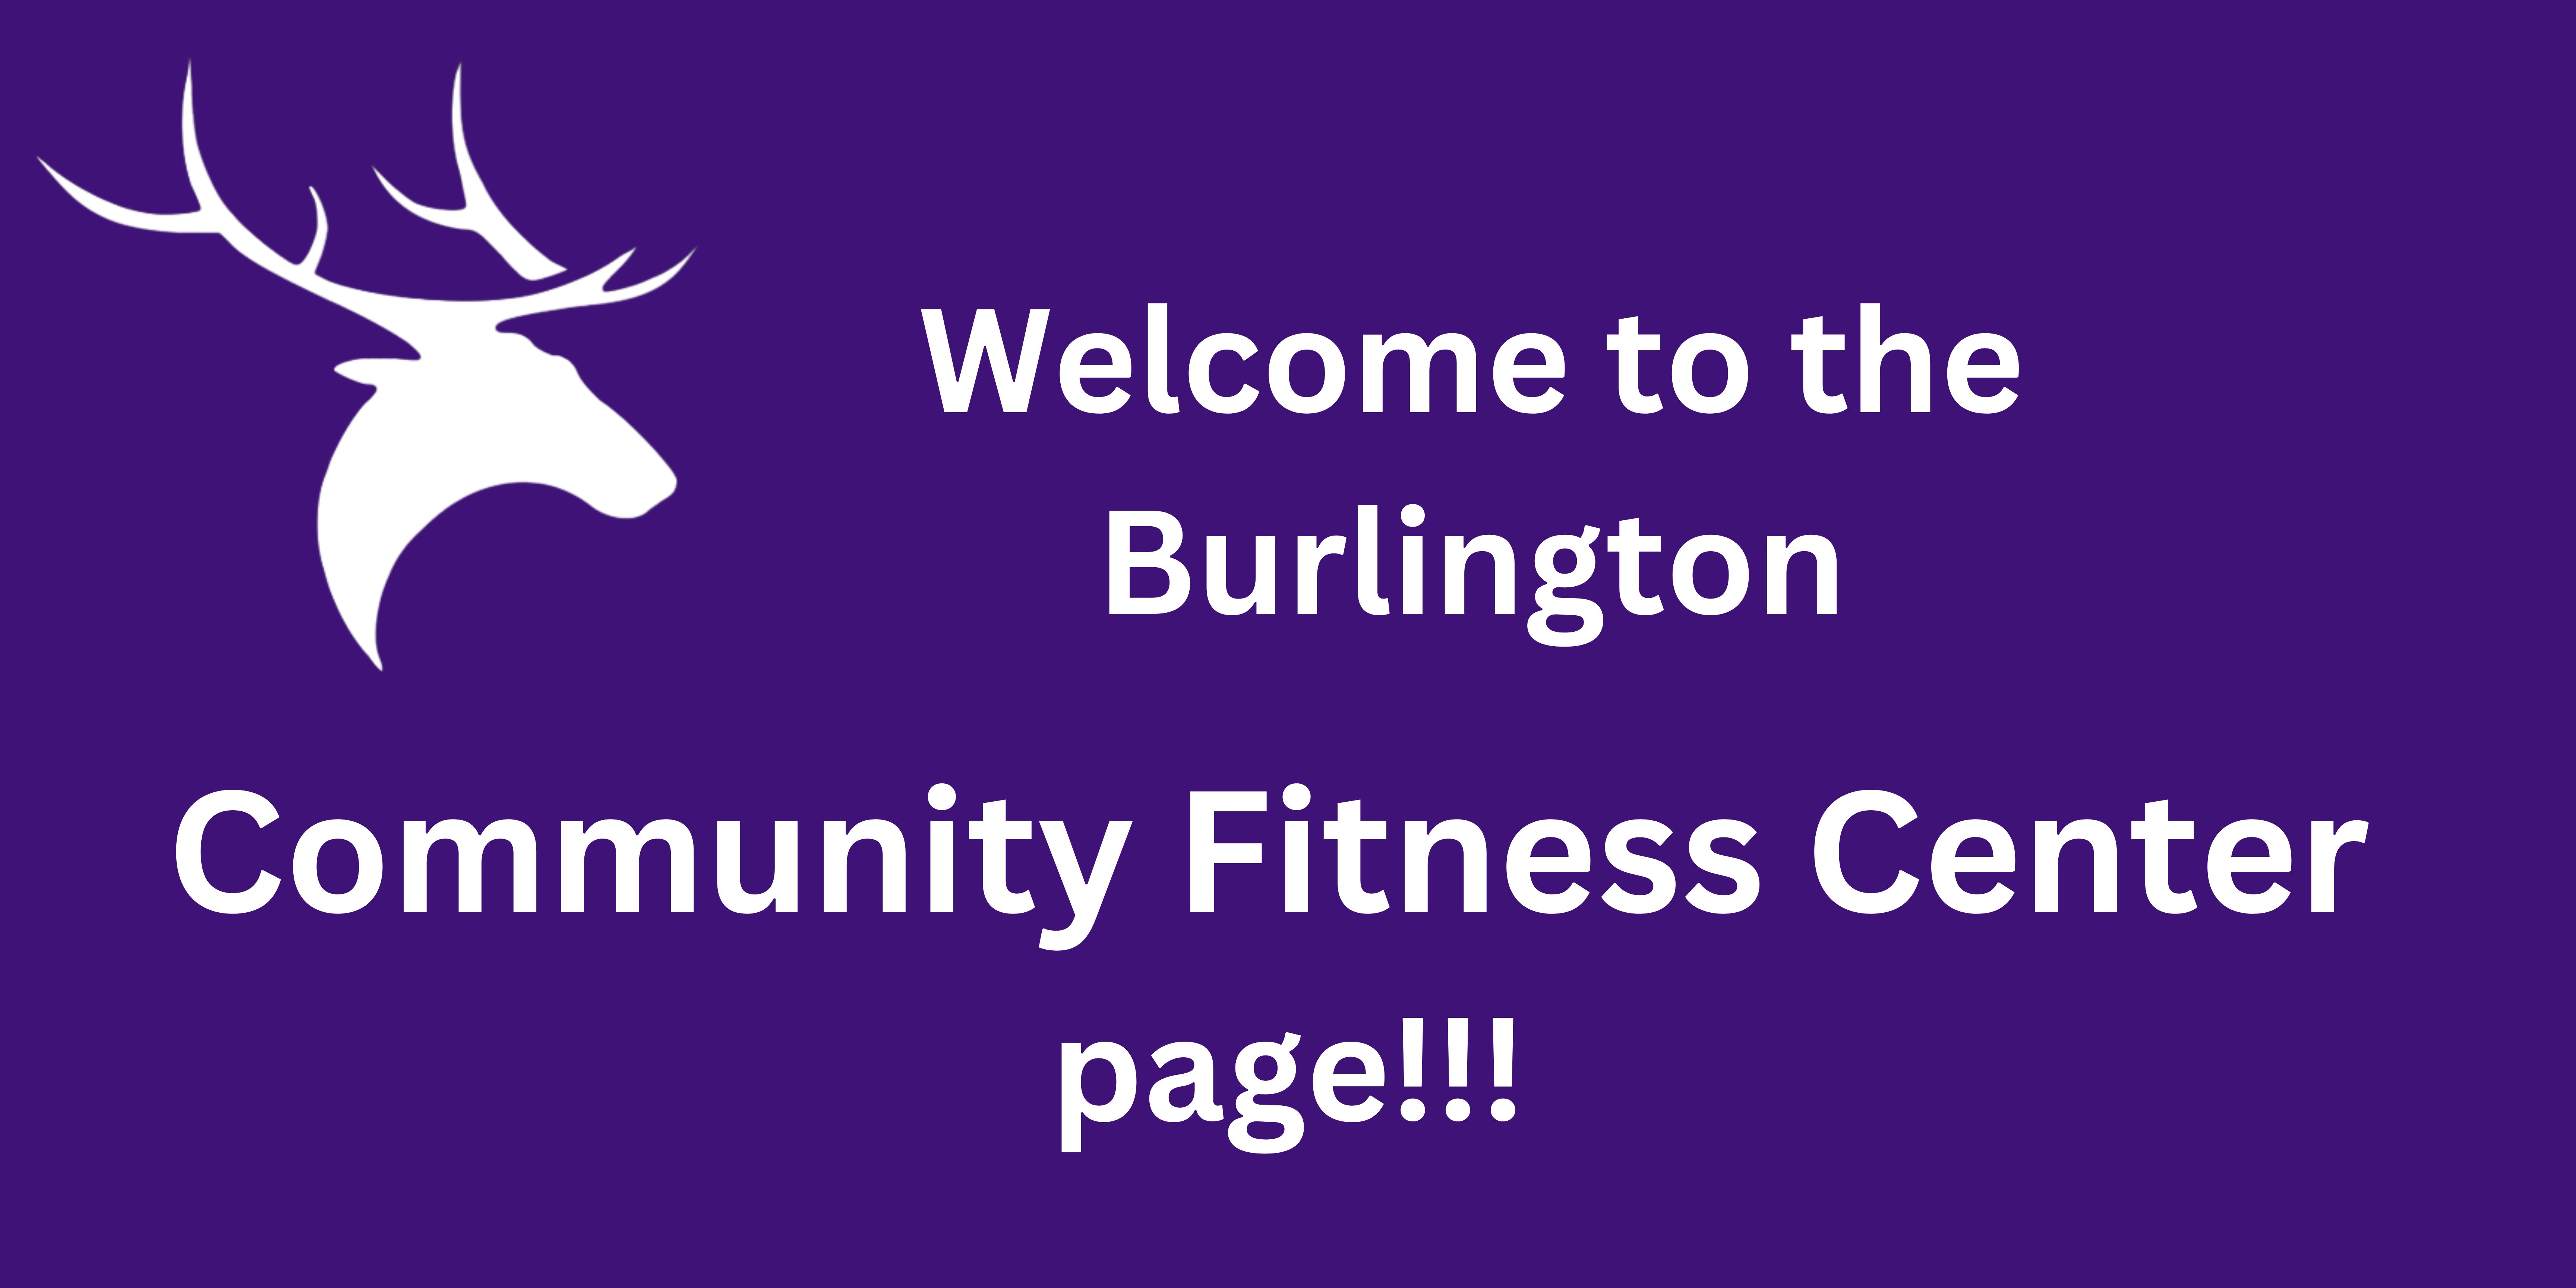 Welcome to the Burlington Community Fitness Center page!